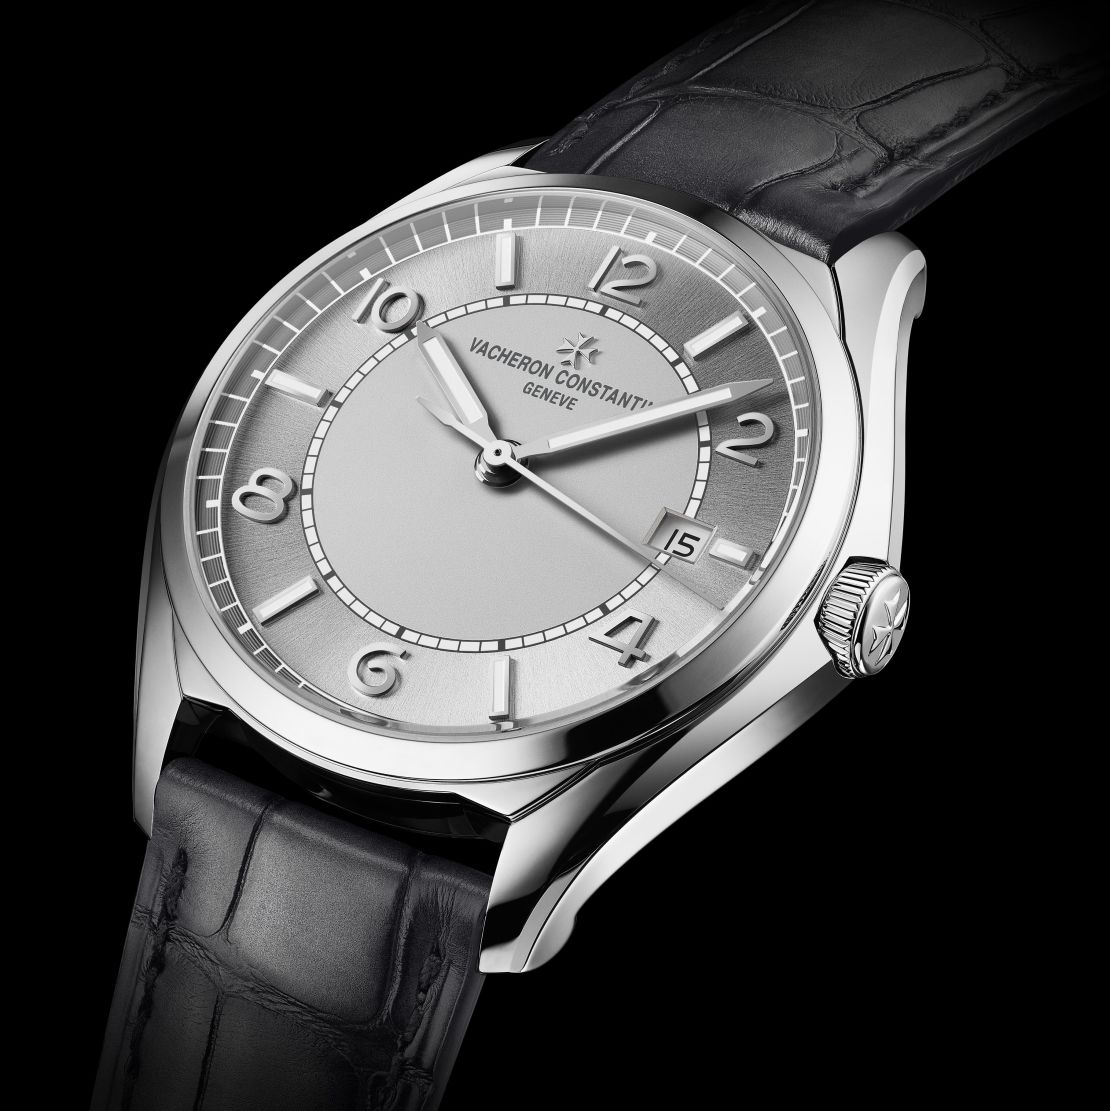 The new FiftySix collection allows customers previously priced out to buy into Vacheron Constantin, with the FiftySix automatic in stainless steel priced at $11,700.